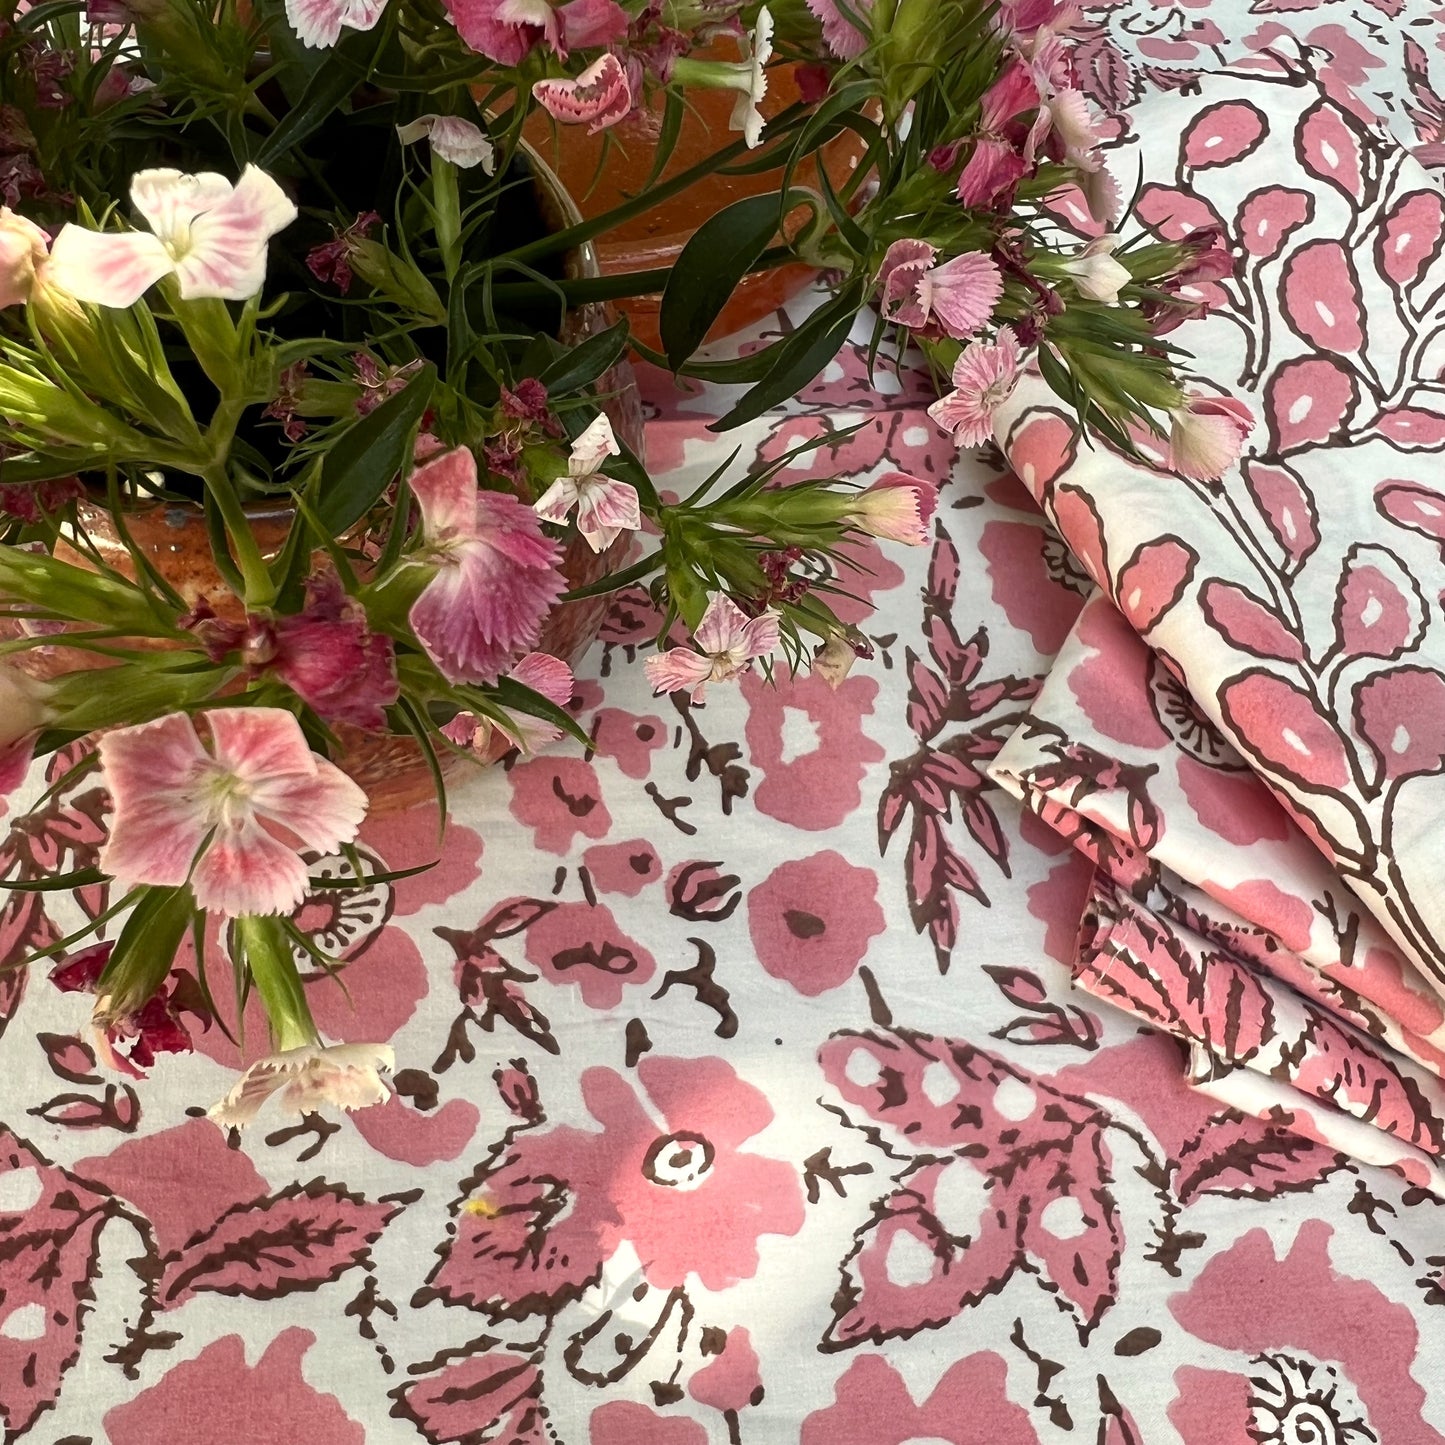 vintage floral cotton tablecloth salmon, choc and white